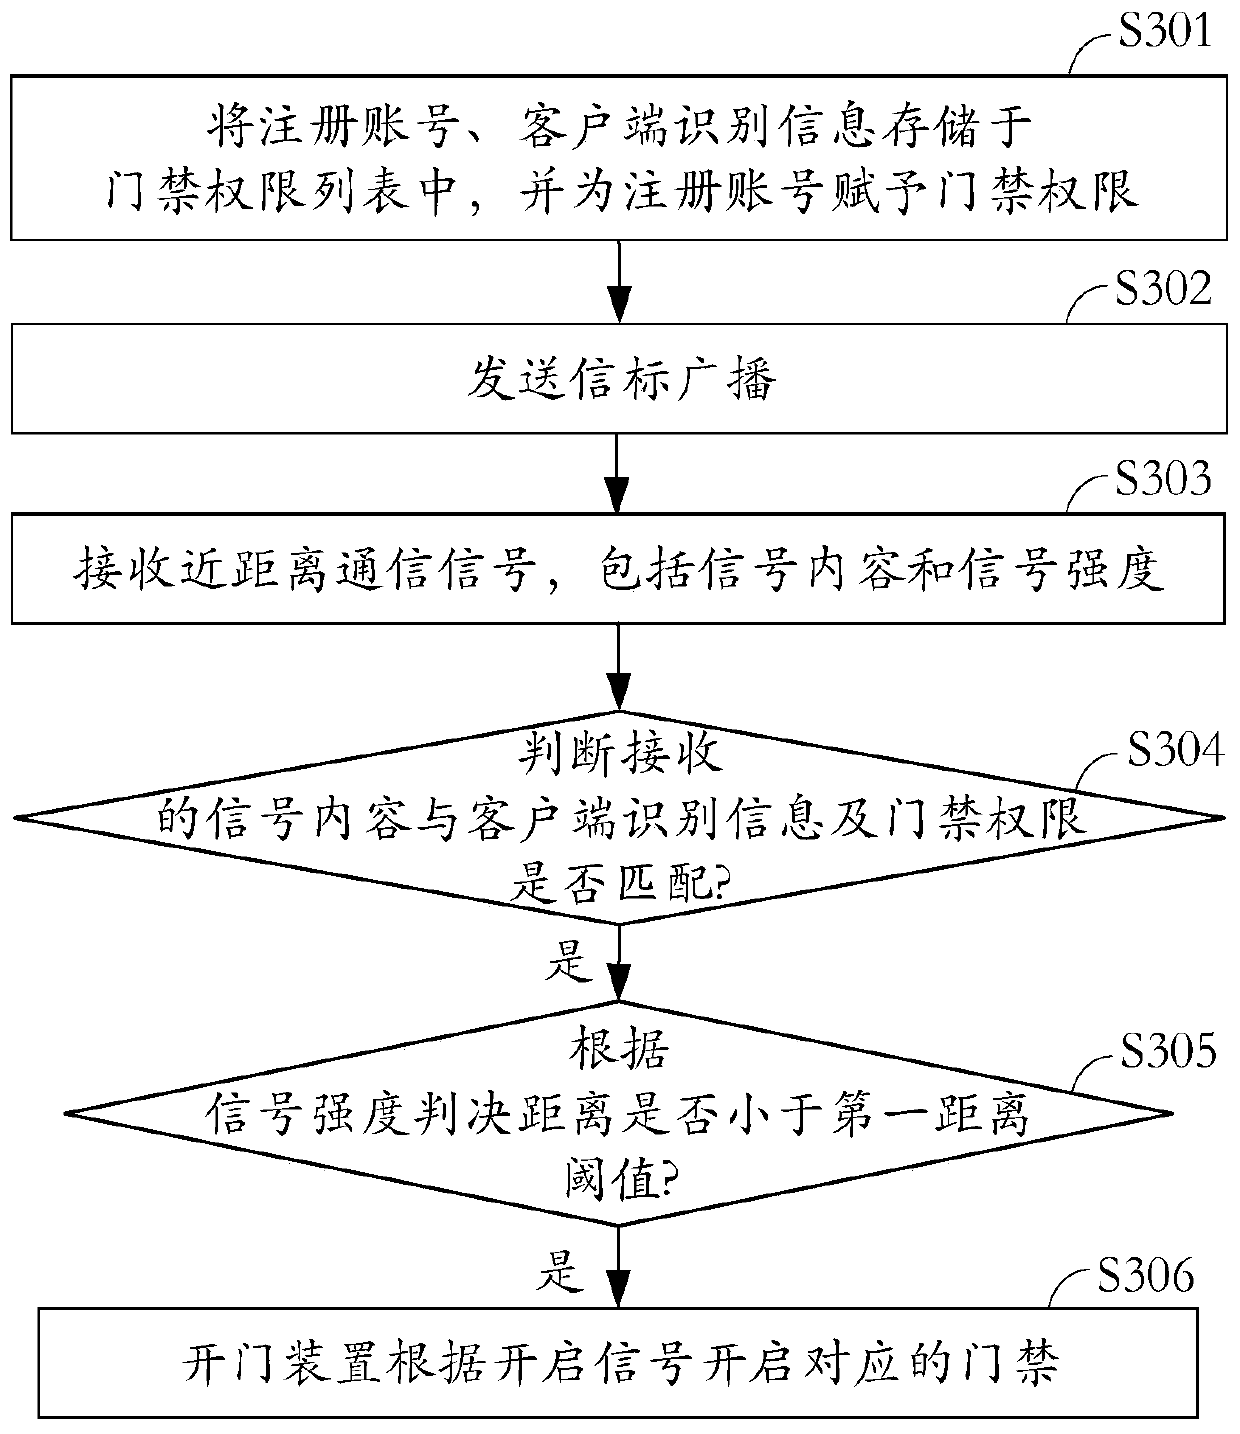 Access control system, client, and identity verification method for access control